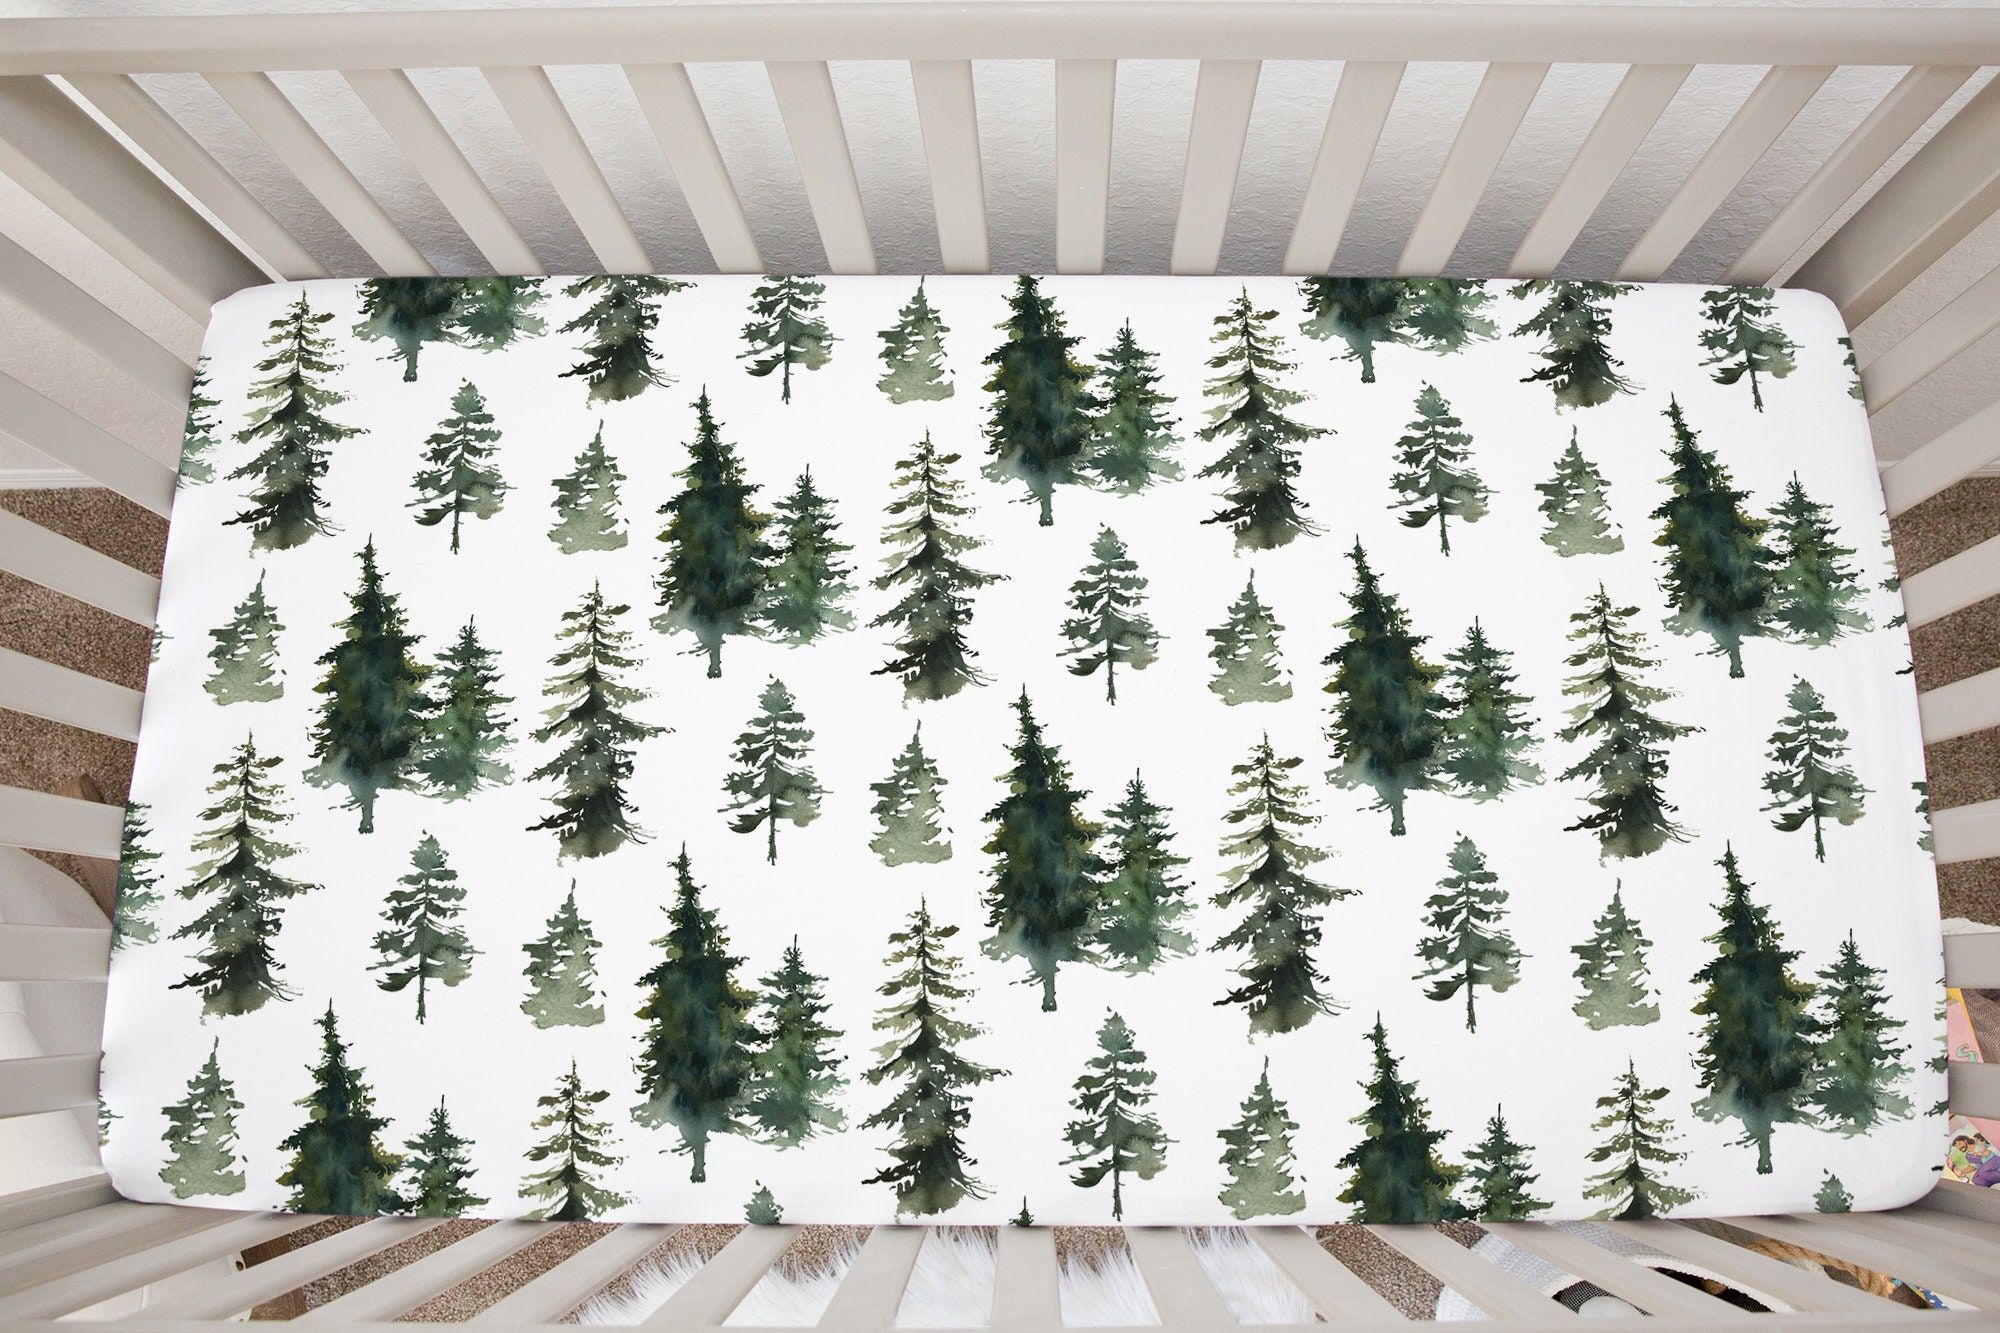 How to Choose the Perfect Baby Boy Crib
Bedding Set